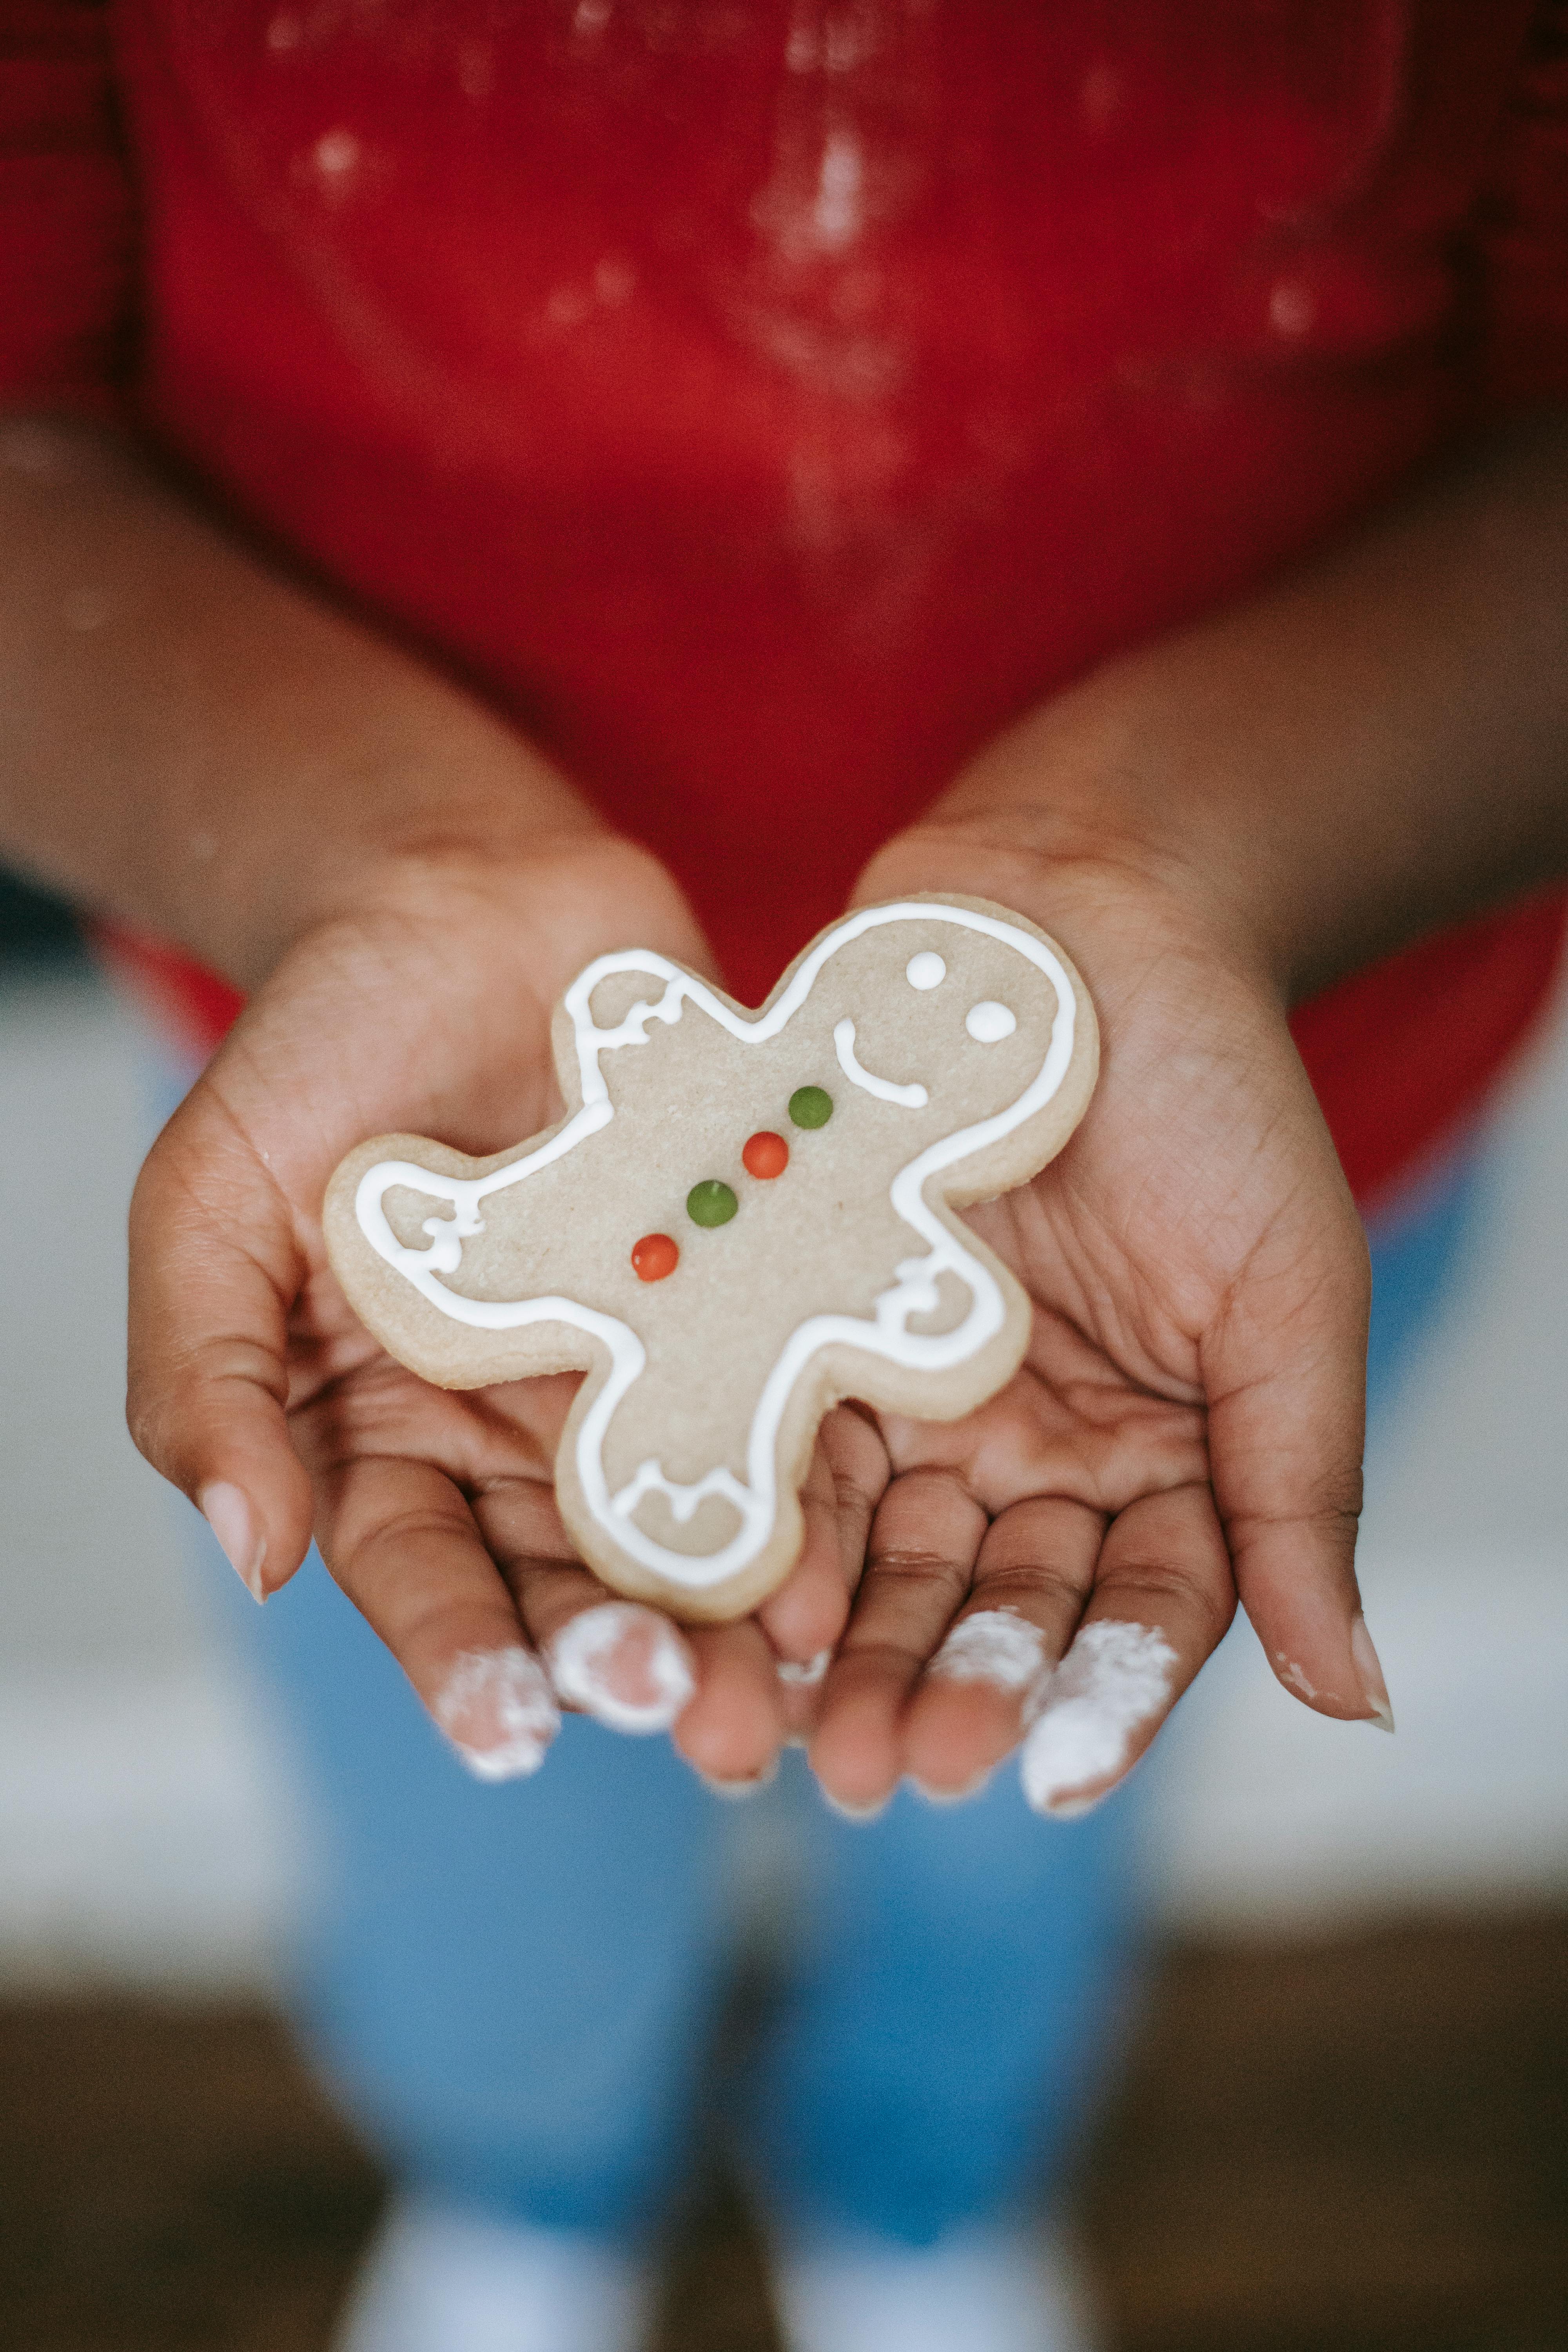 crop black child showing gingerbread cookie during christmas holiday